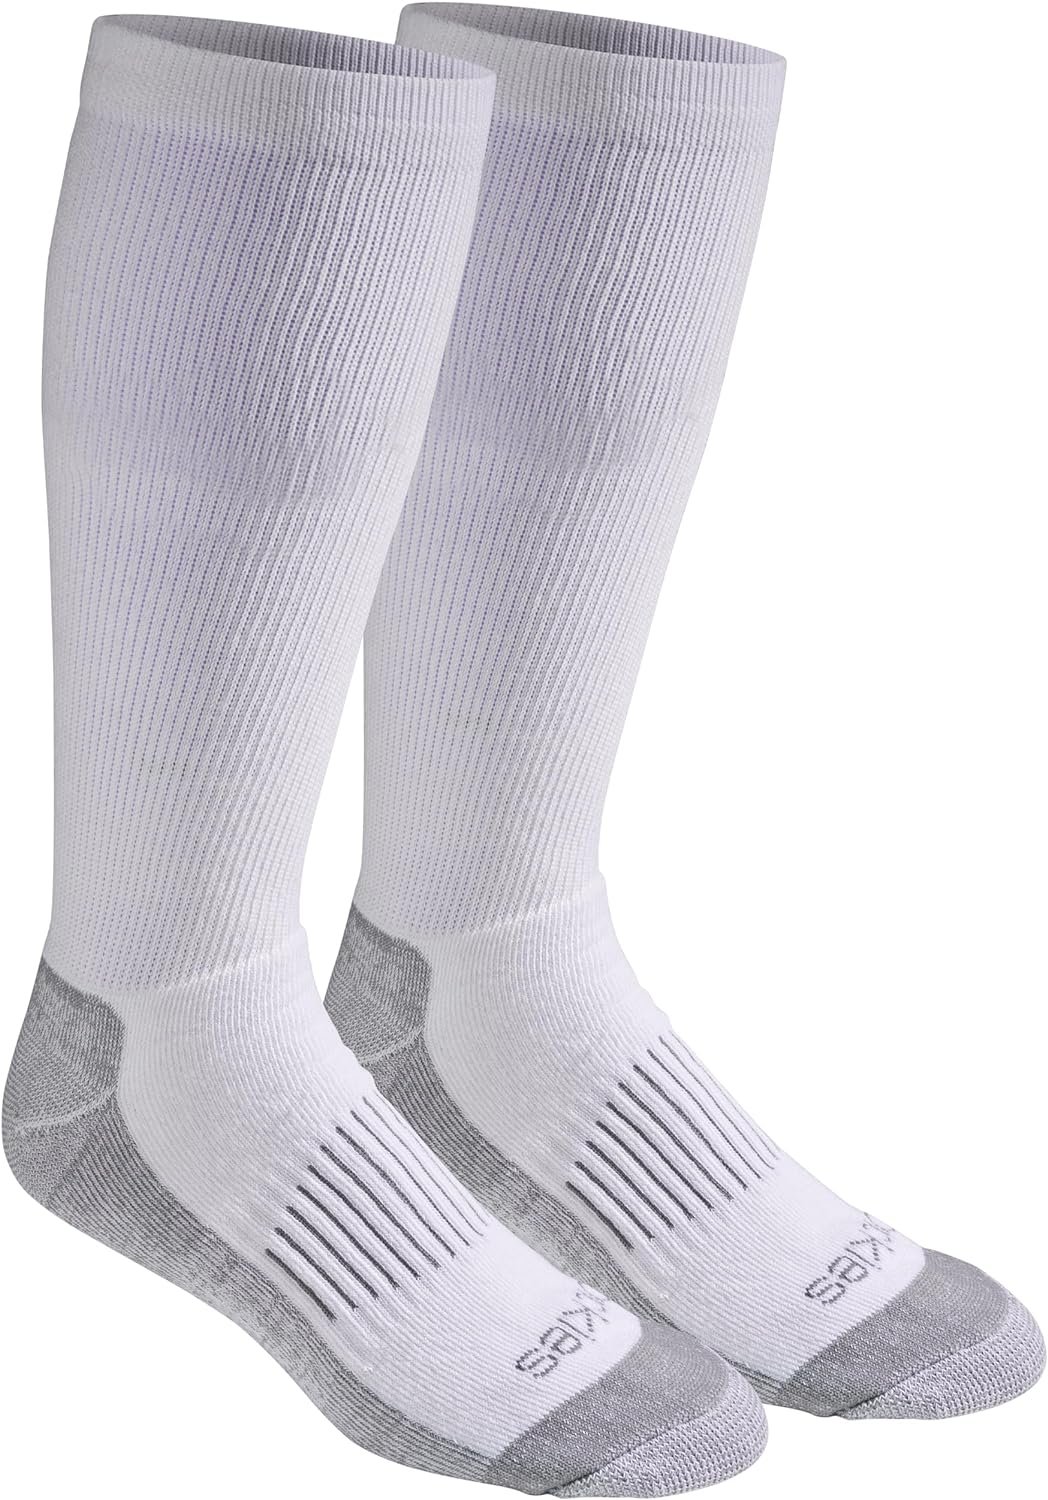 Dickies Men’s Light Comfort Compression Over-the-calf Socks Review